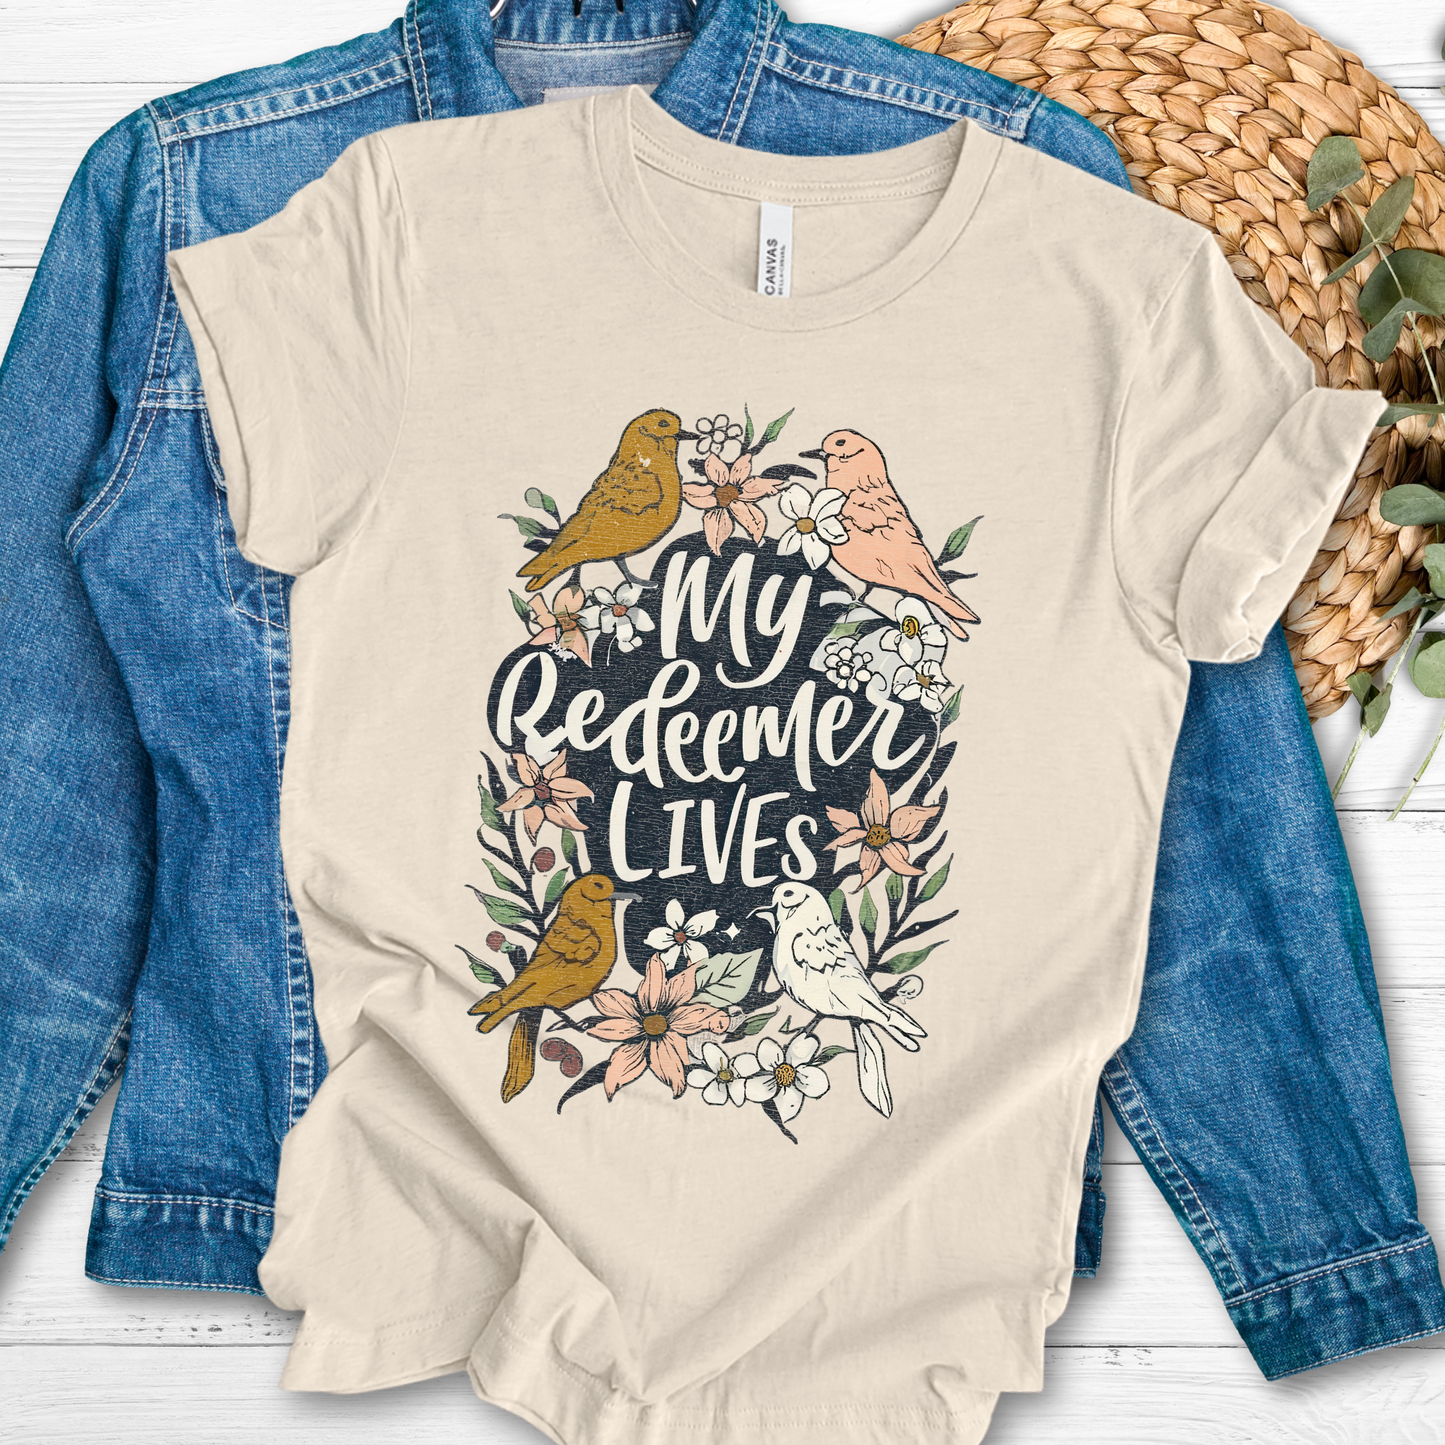 My redeemer lives tee - Additional Colors